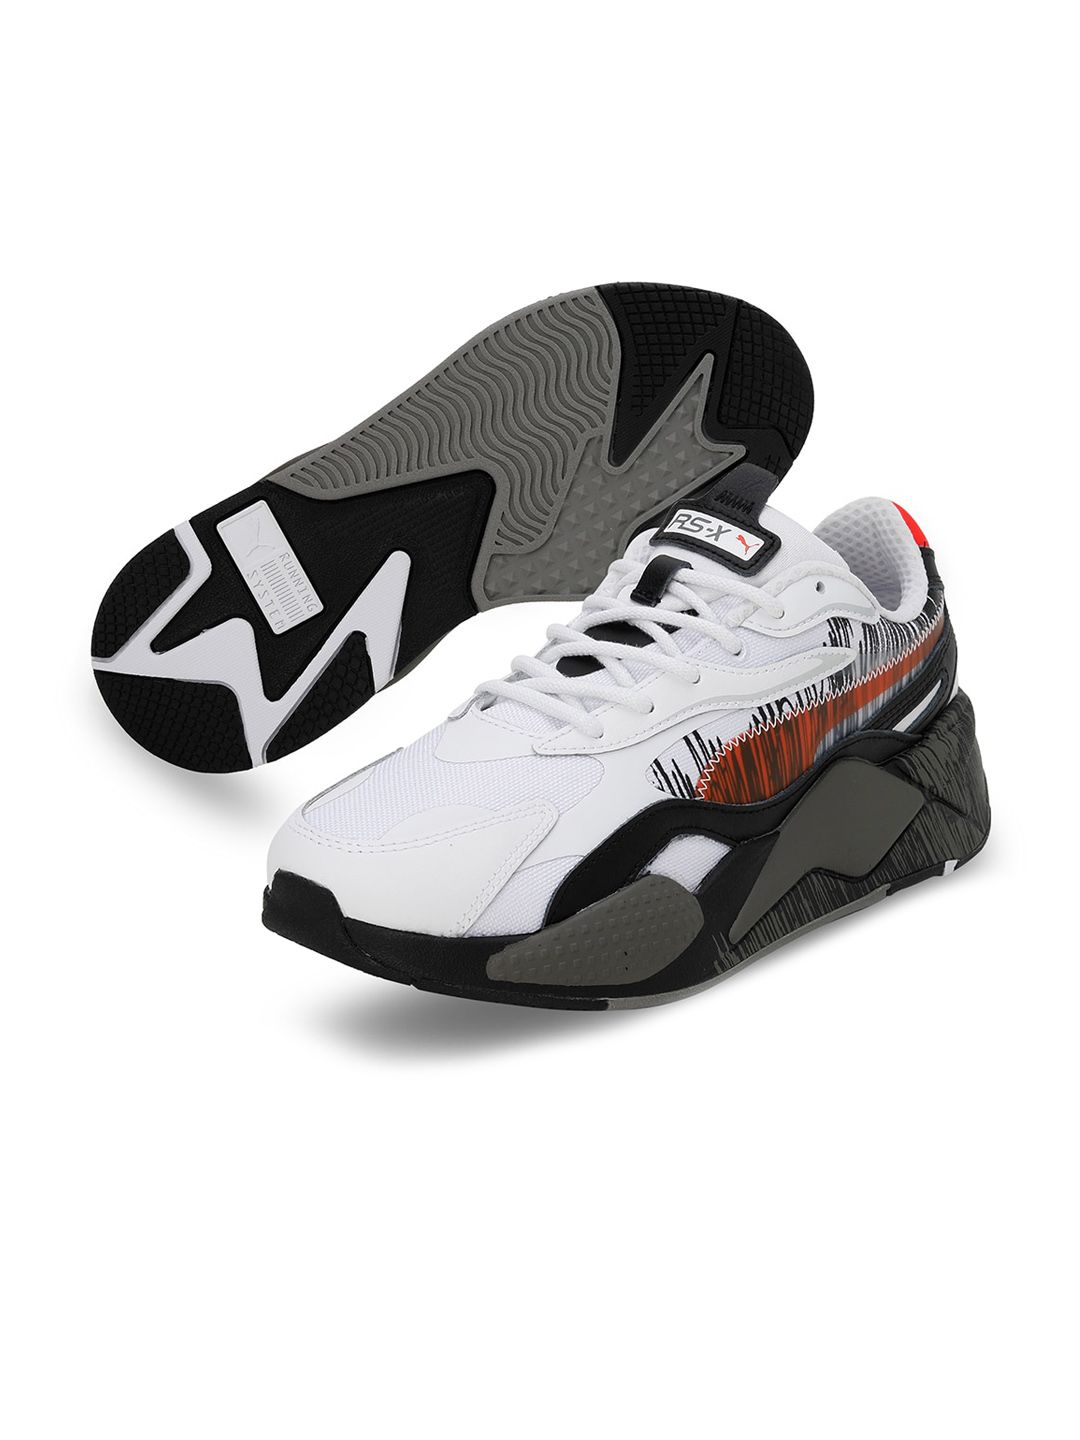 Puma RS-X RENDER Colourblocked Sneakers Price in India